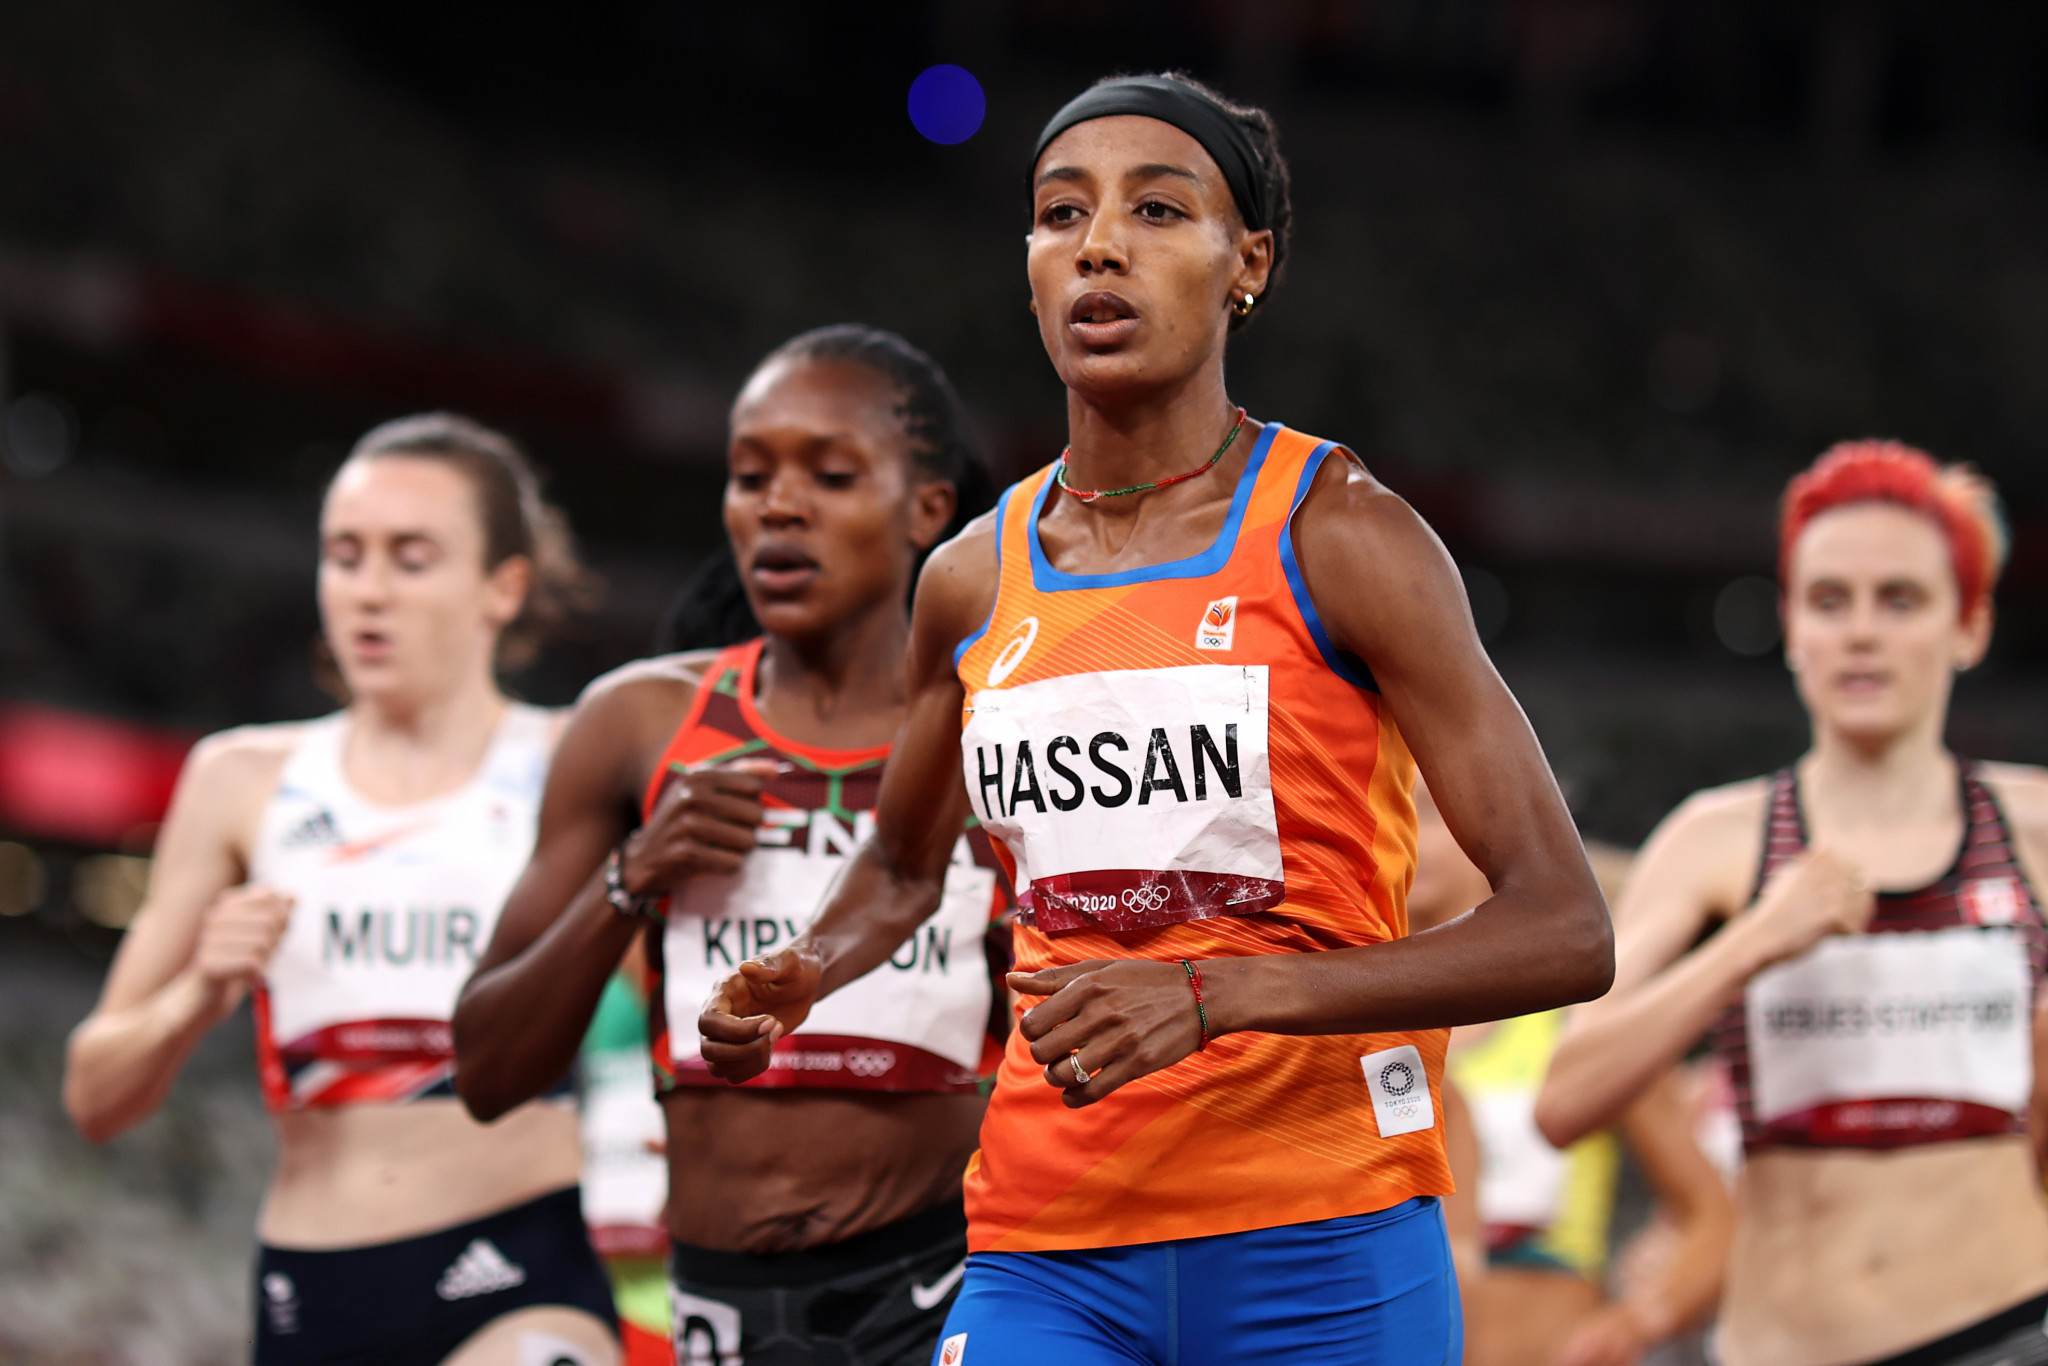 Home runner Sifan Hassan earned a win double at the FBK Games ©Getty Images